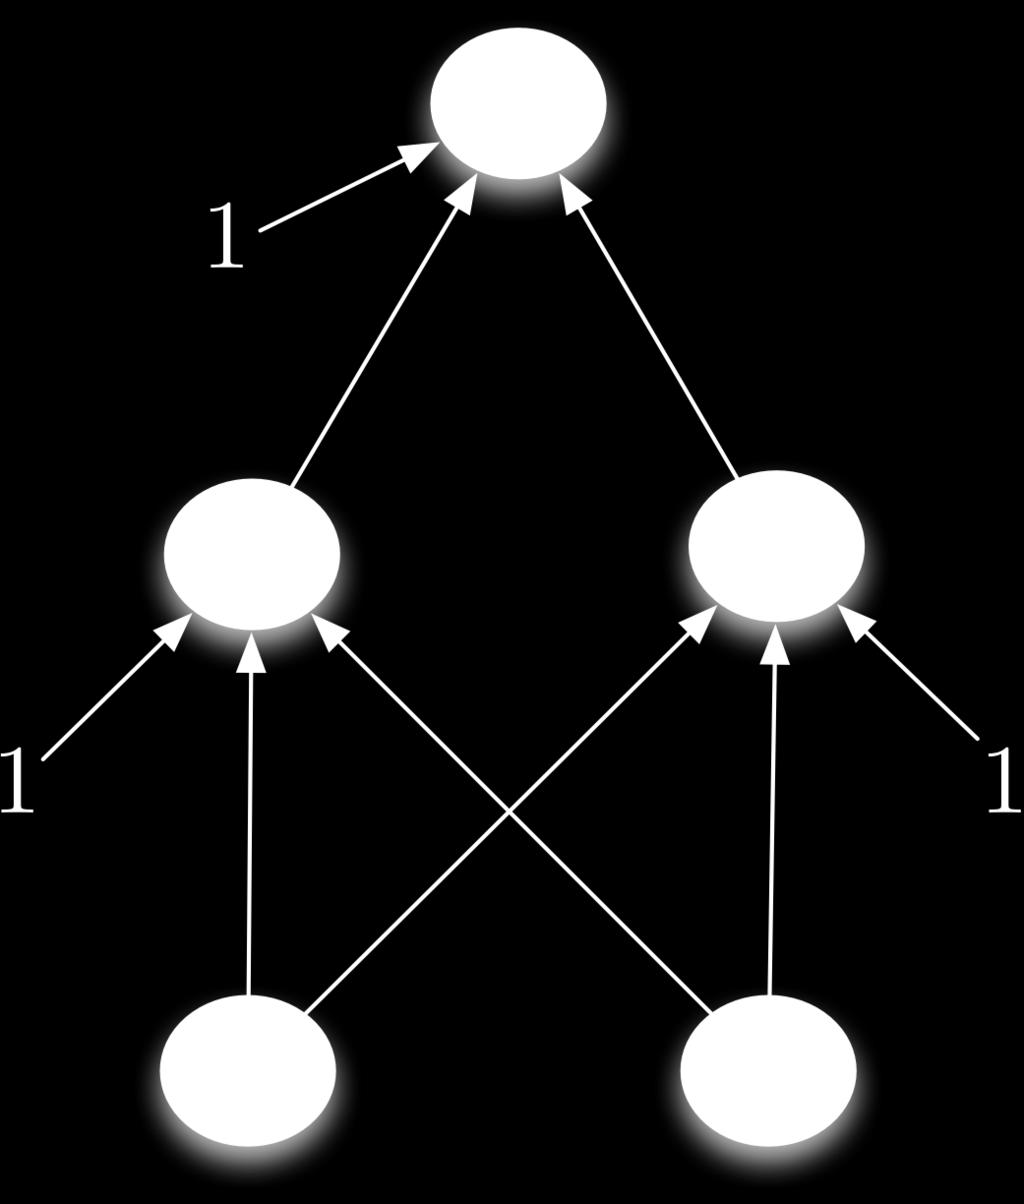 Multilayer Perceptrons Designing a network to compute XOR: Assume